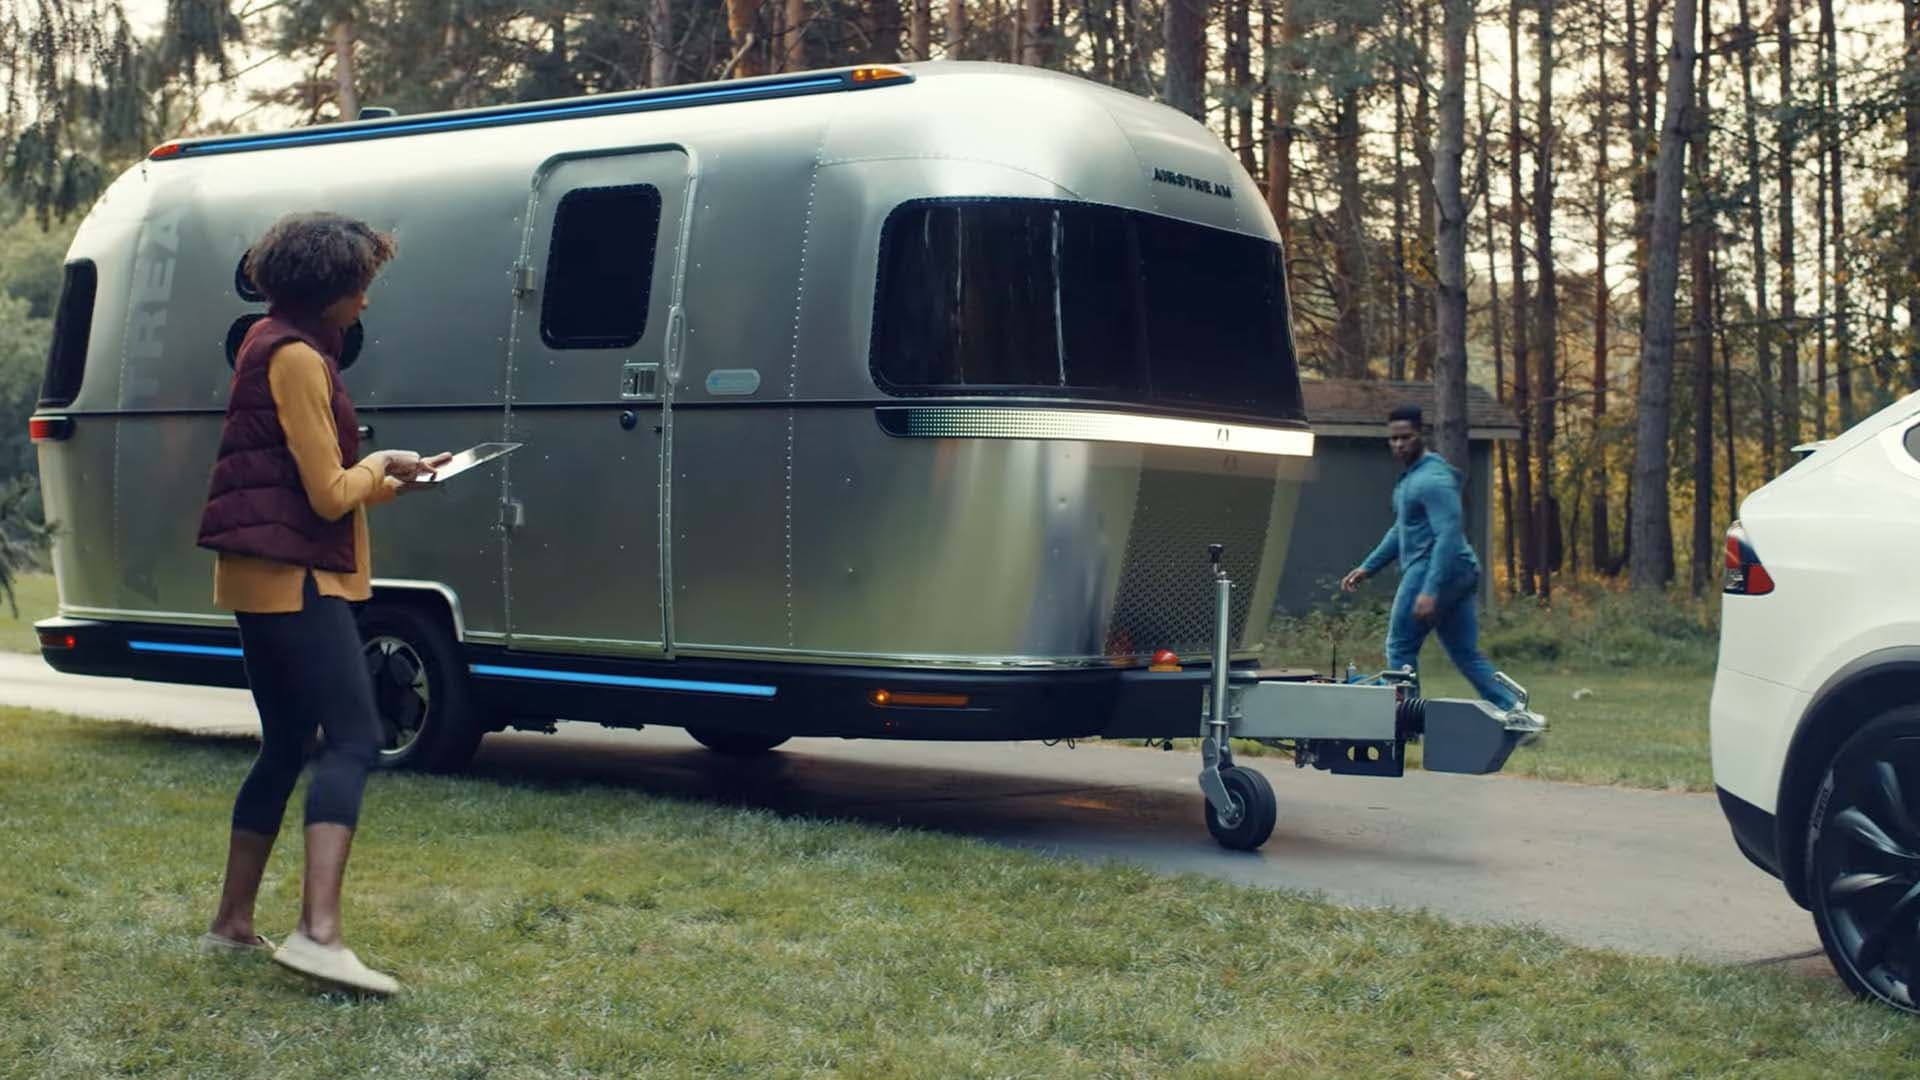 This Airstream Camper Concept Uses Electric Motors to Reverse on Its Own